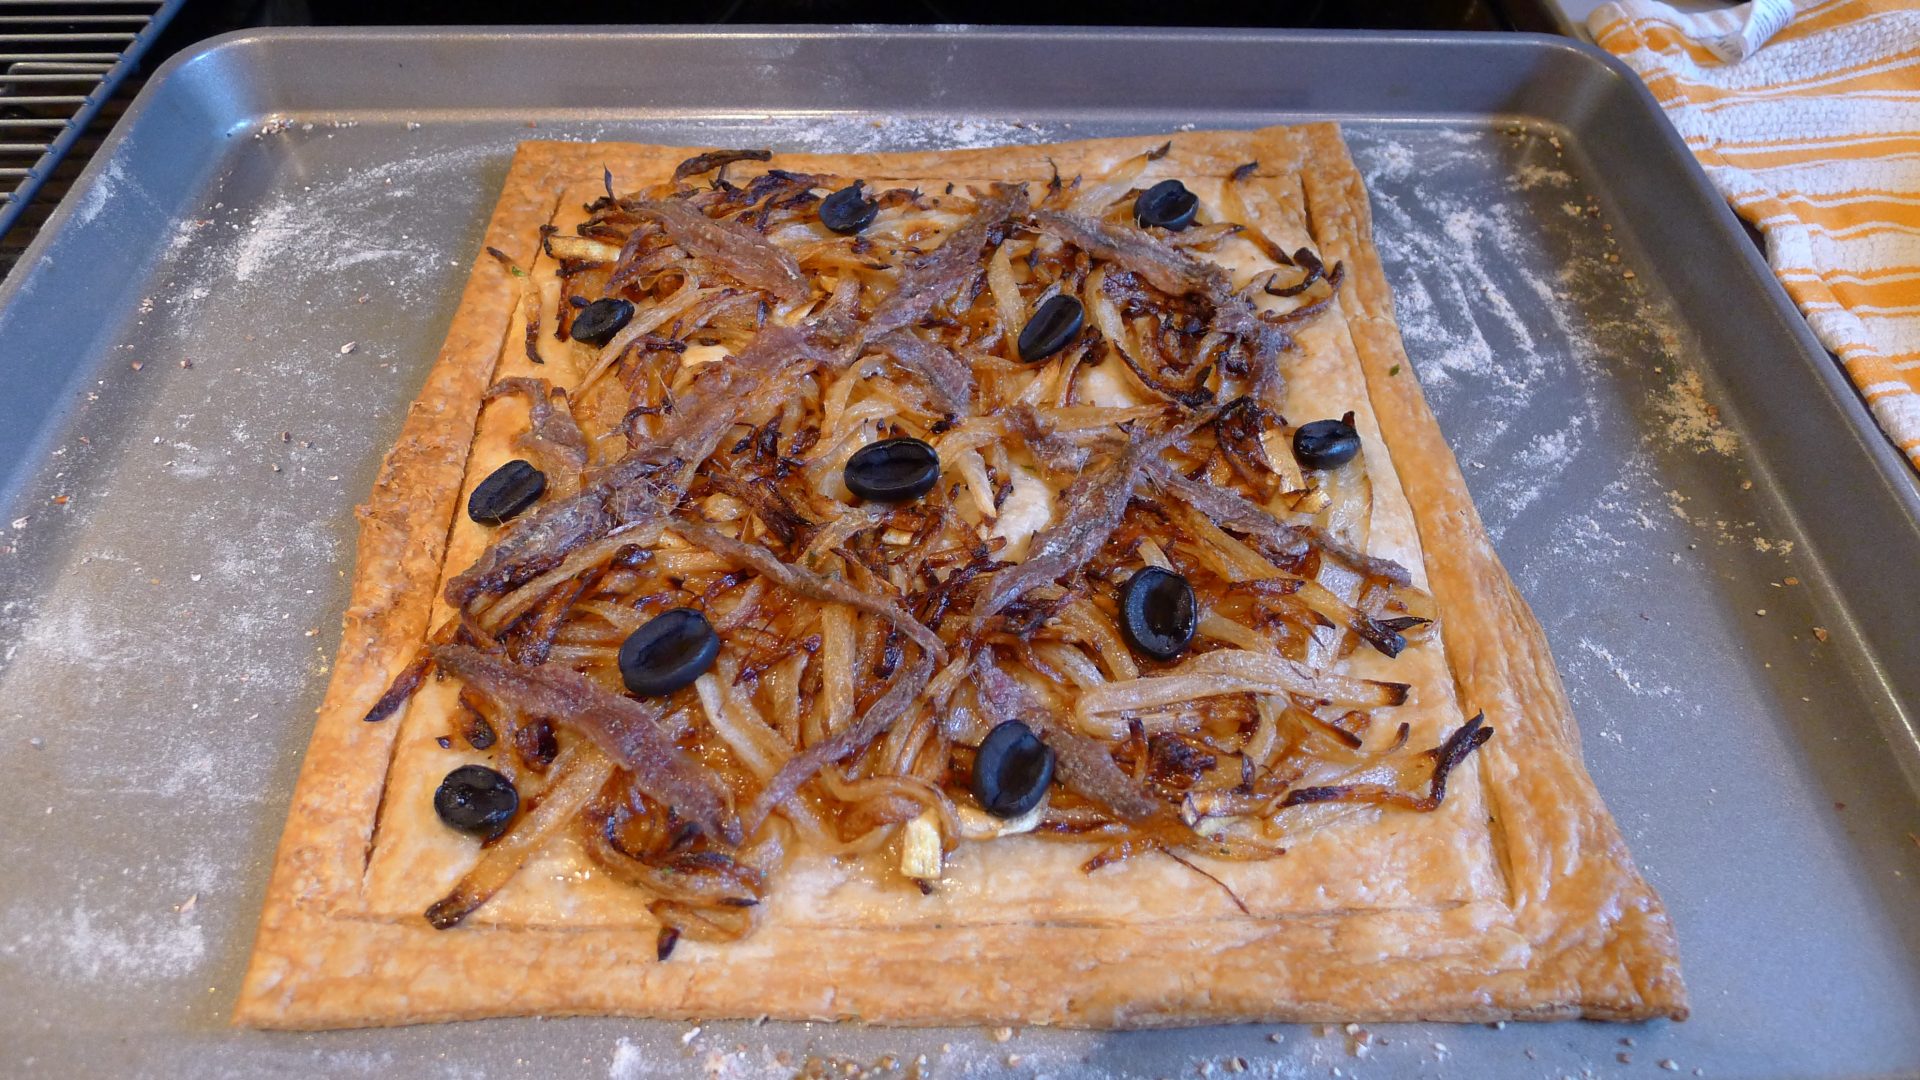 A rough-and-ready Pissaladière made with the aid of frozen puff pastry.